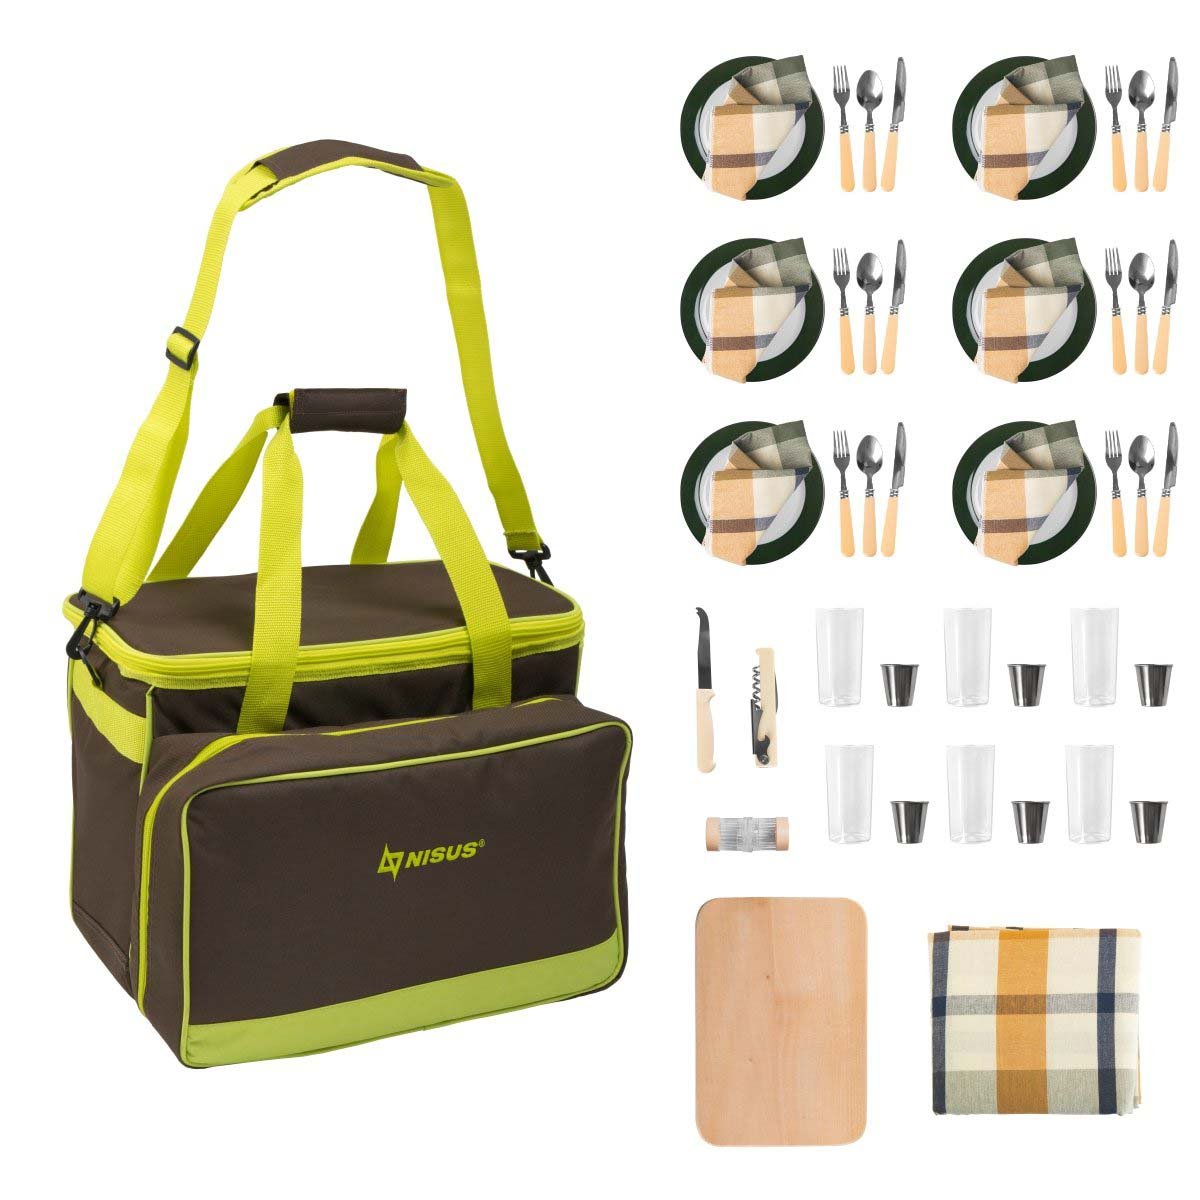 Nisus Insulated Picninc Bag with tableware for 6 persons